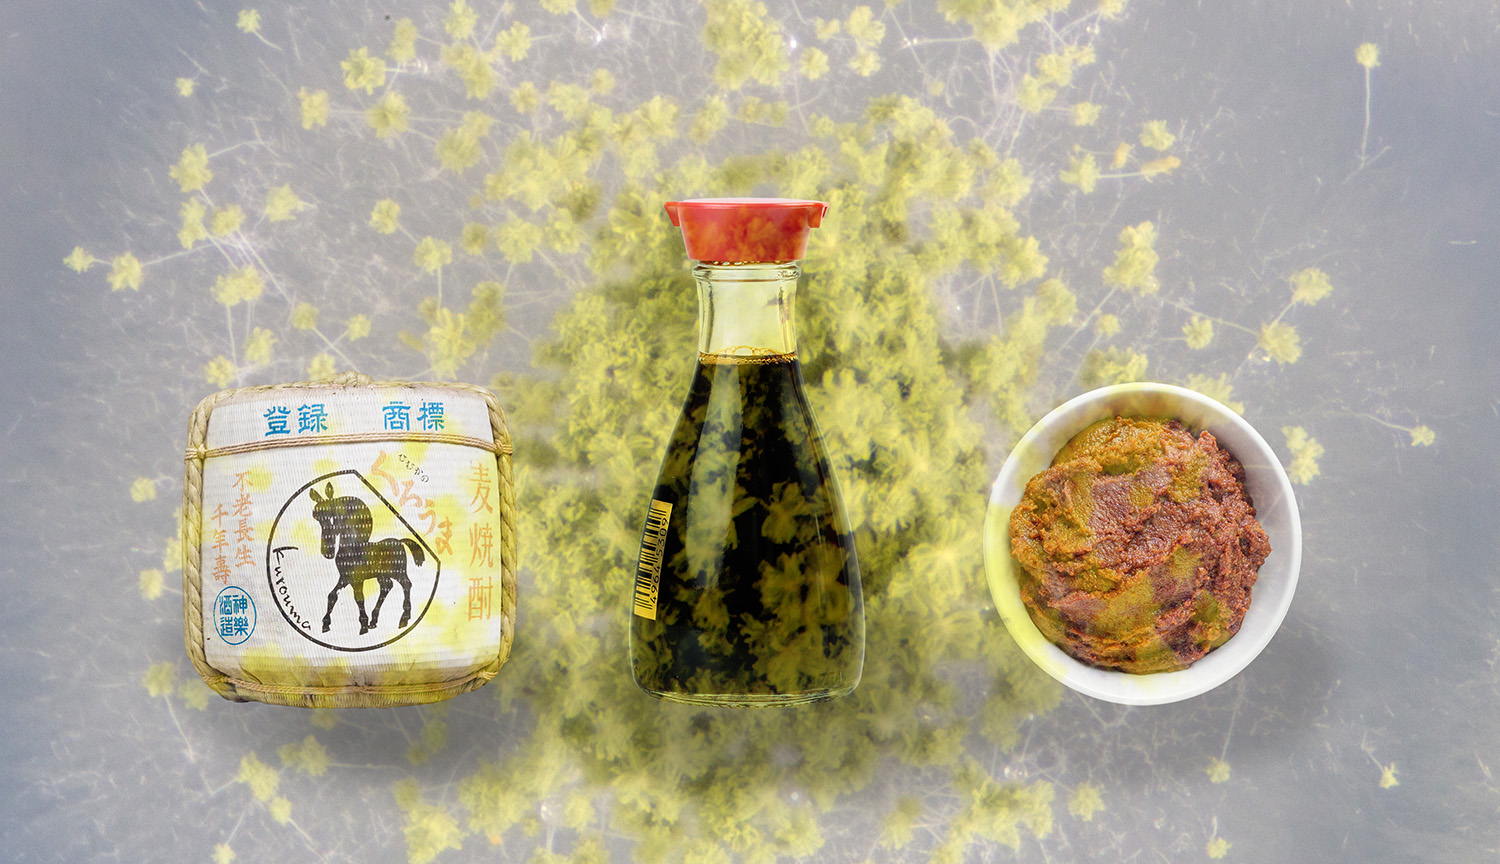 A barrel of sake, jar of soy sauce and bowl of miso paste against a background of fluffy, yellow-green Aspergillus mold.